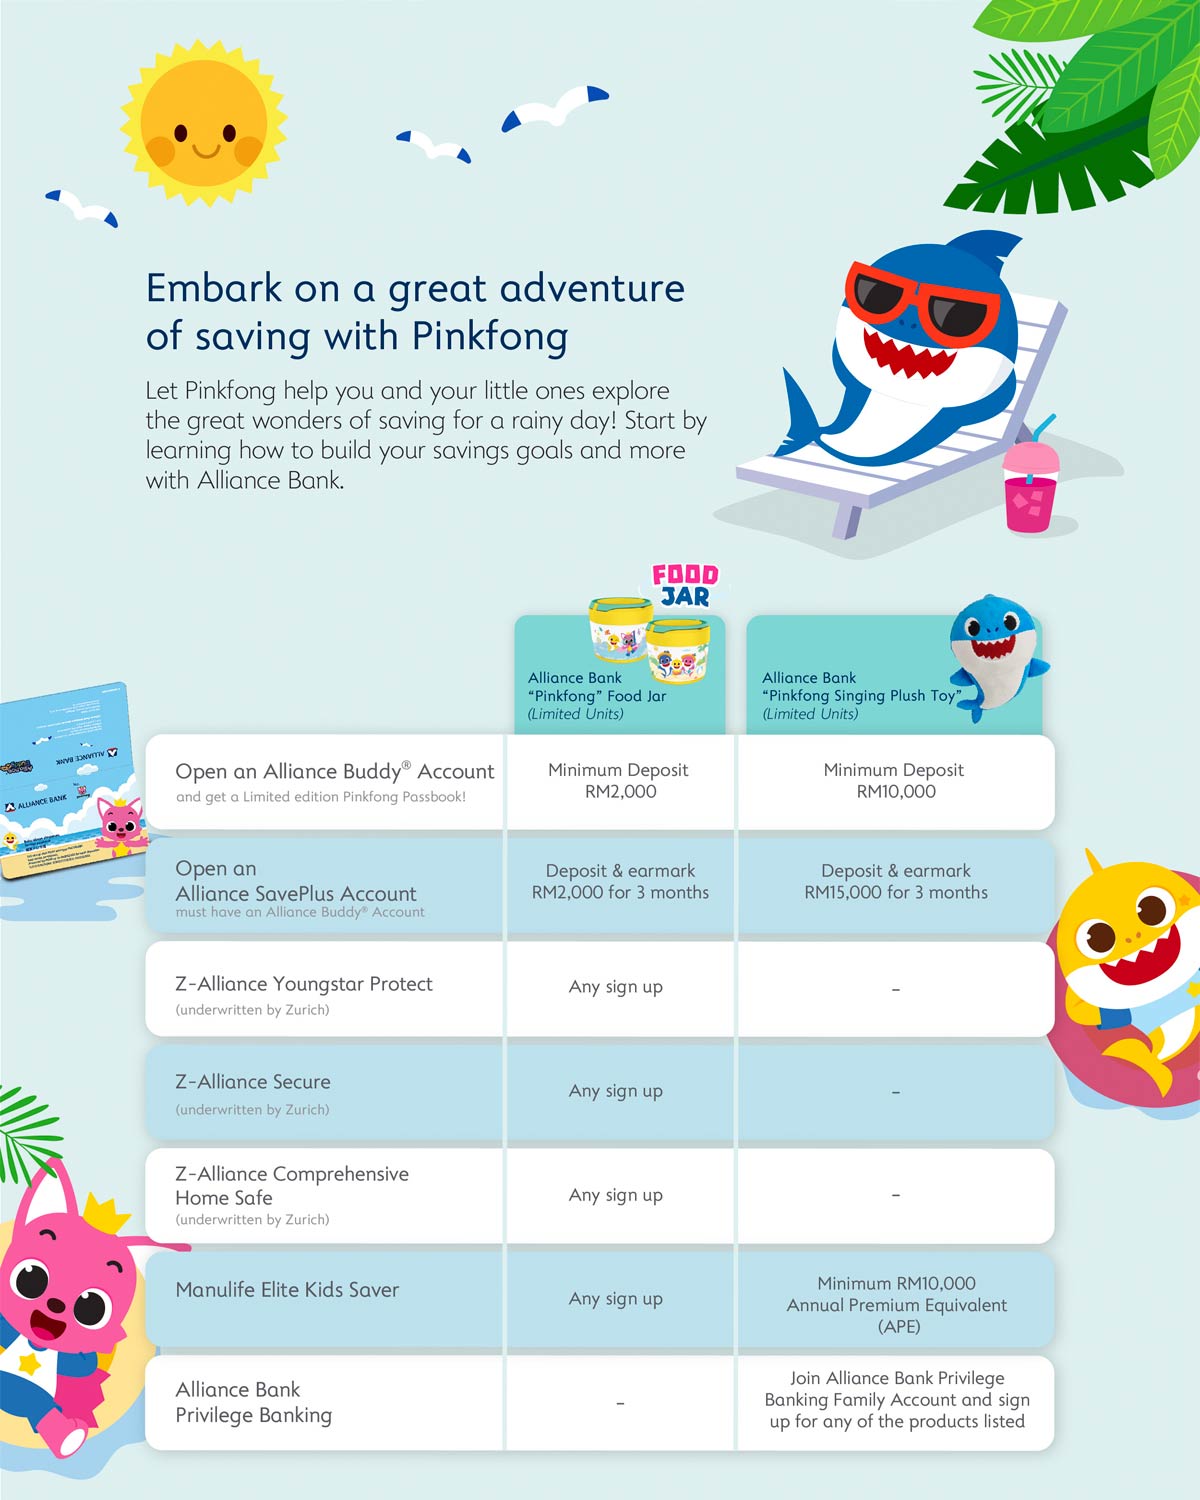 alliance bank x Pinkfong & Baby Shark campaign